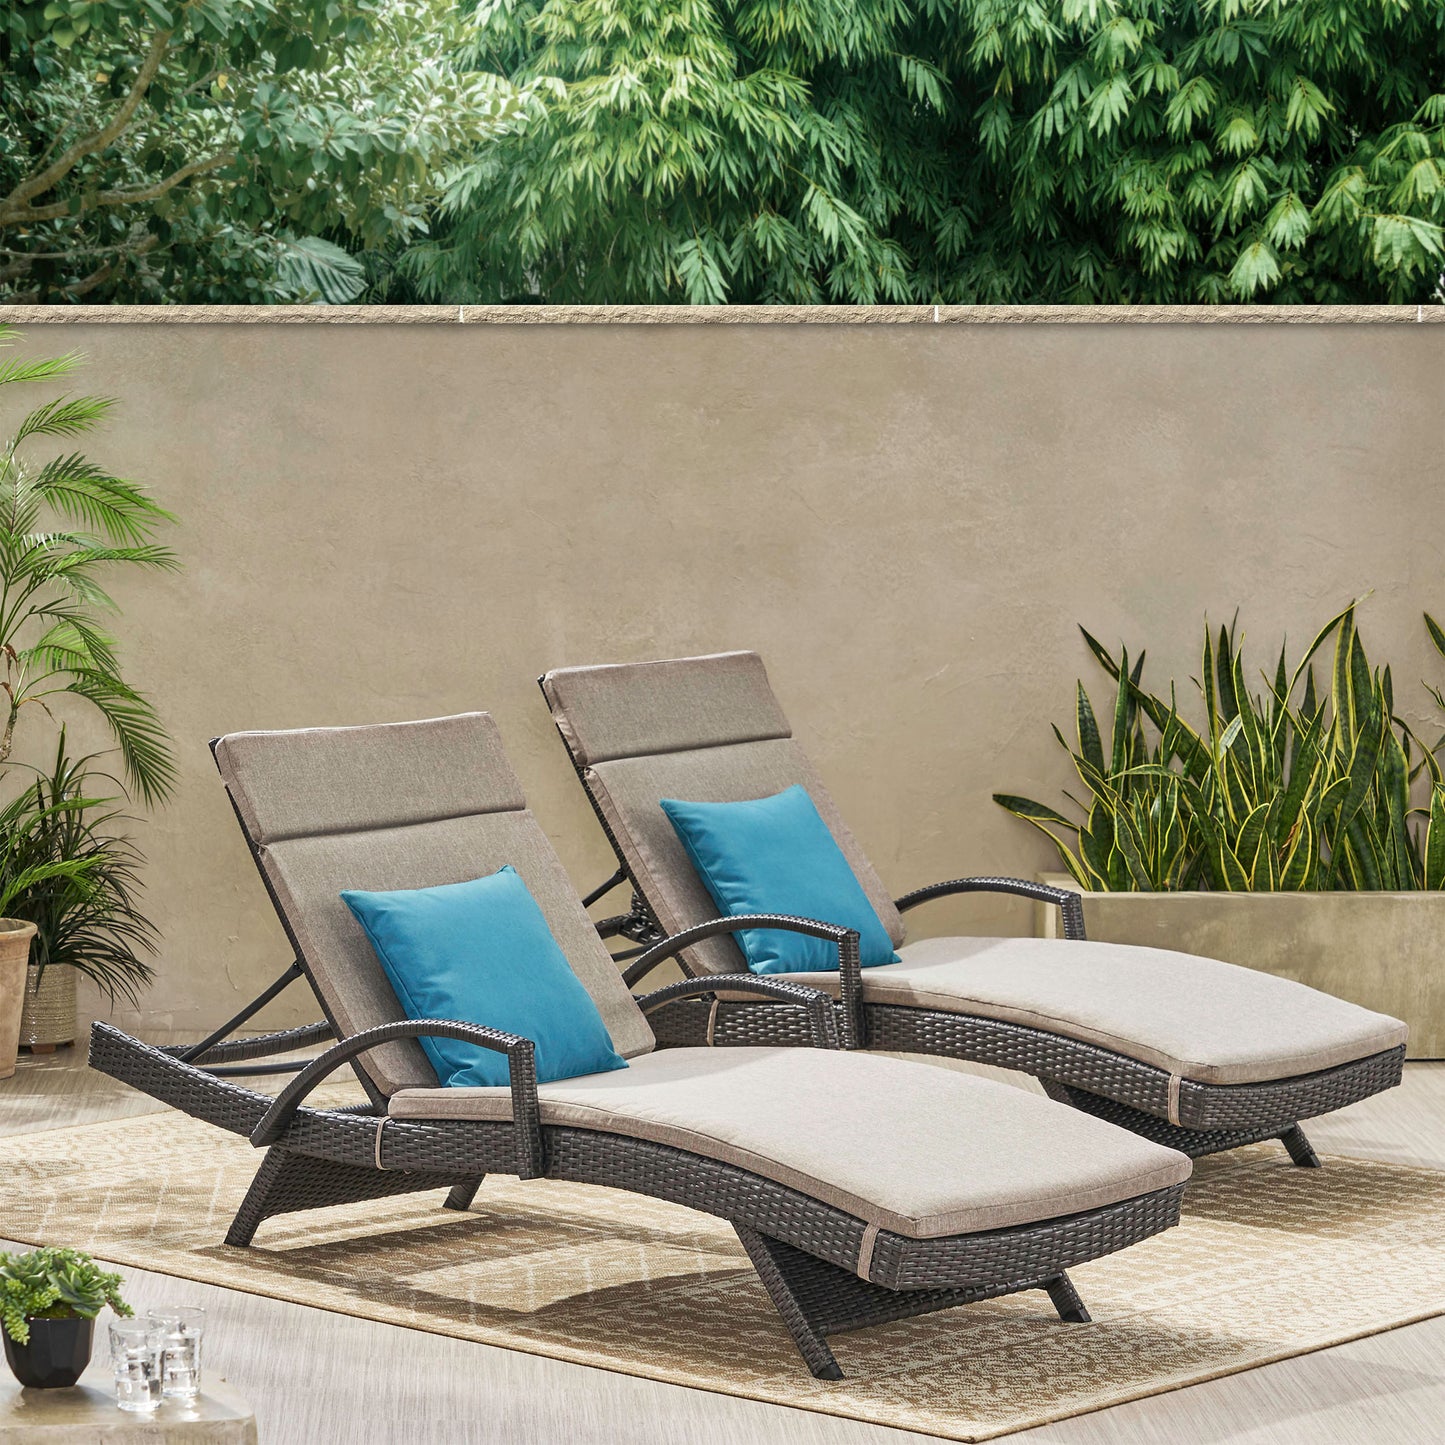 Soleil Outdoor Wicker Chaise Lounges w/ Water Resistant Cushions (Set of 2)